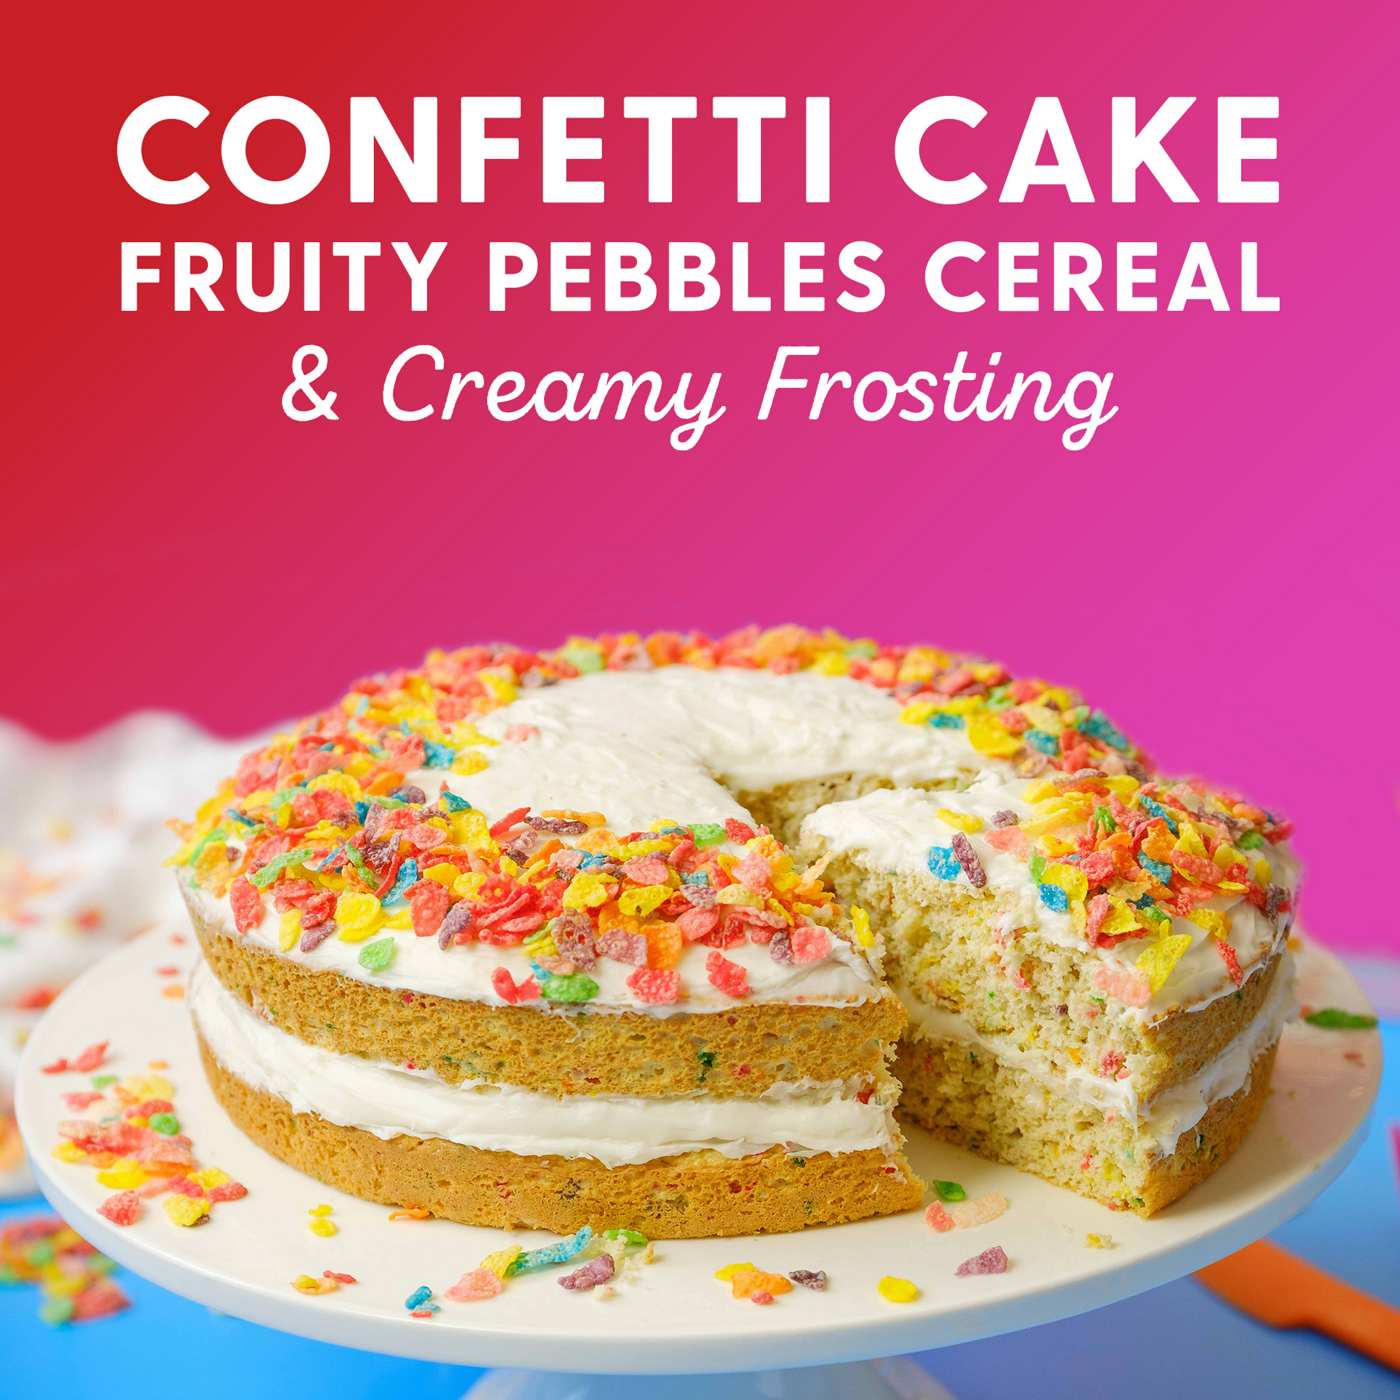 Duncan Hines EPIC Fruity Pebbles Cake Mix Kit; image 7 of 7